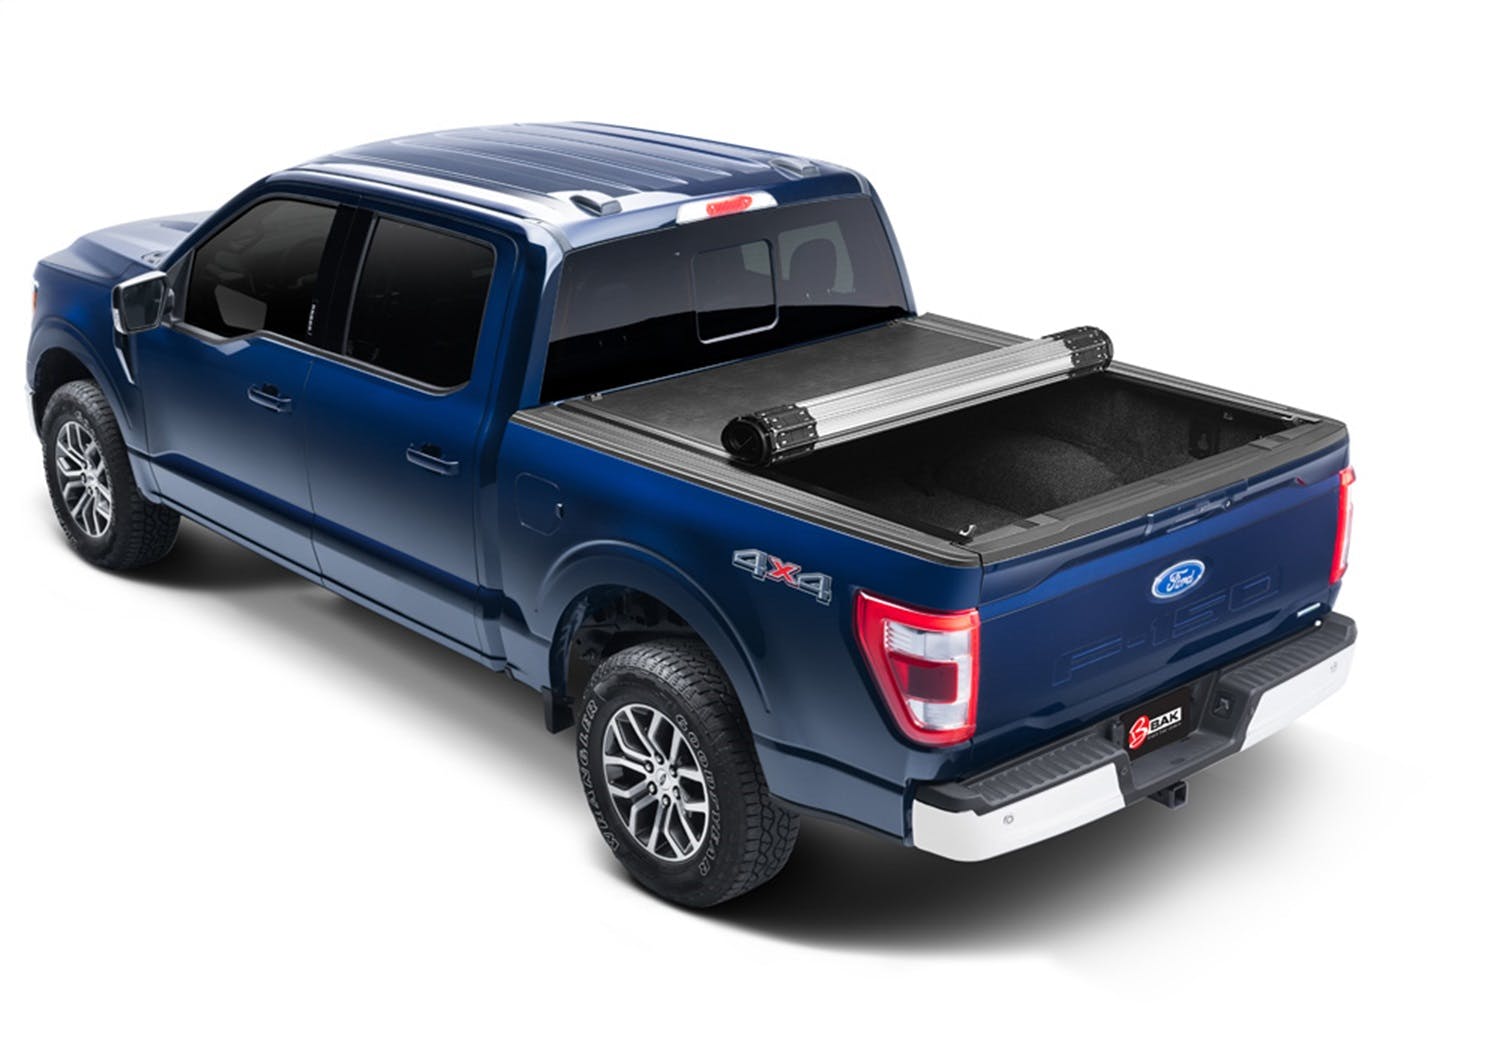 BAK Industries 39333 Revolver X2 Hard Rolling Truck Bed Cover